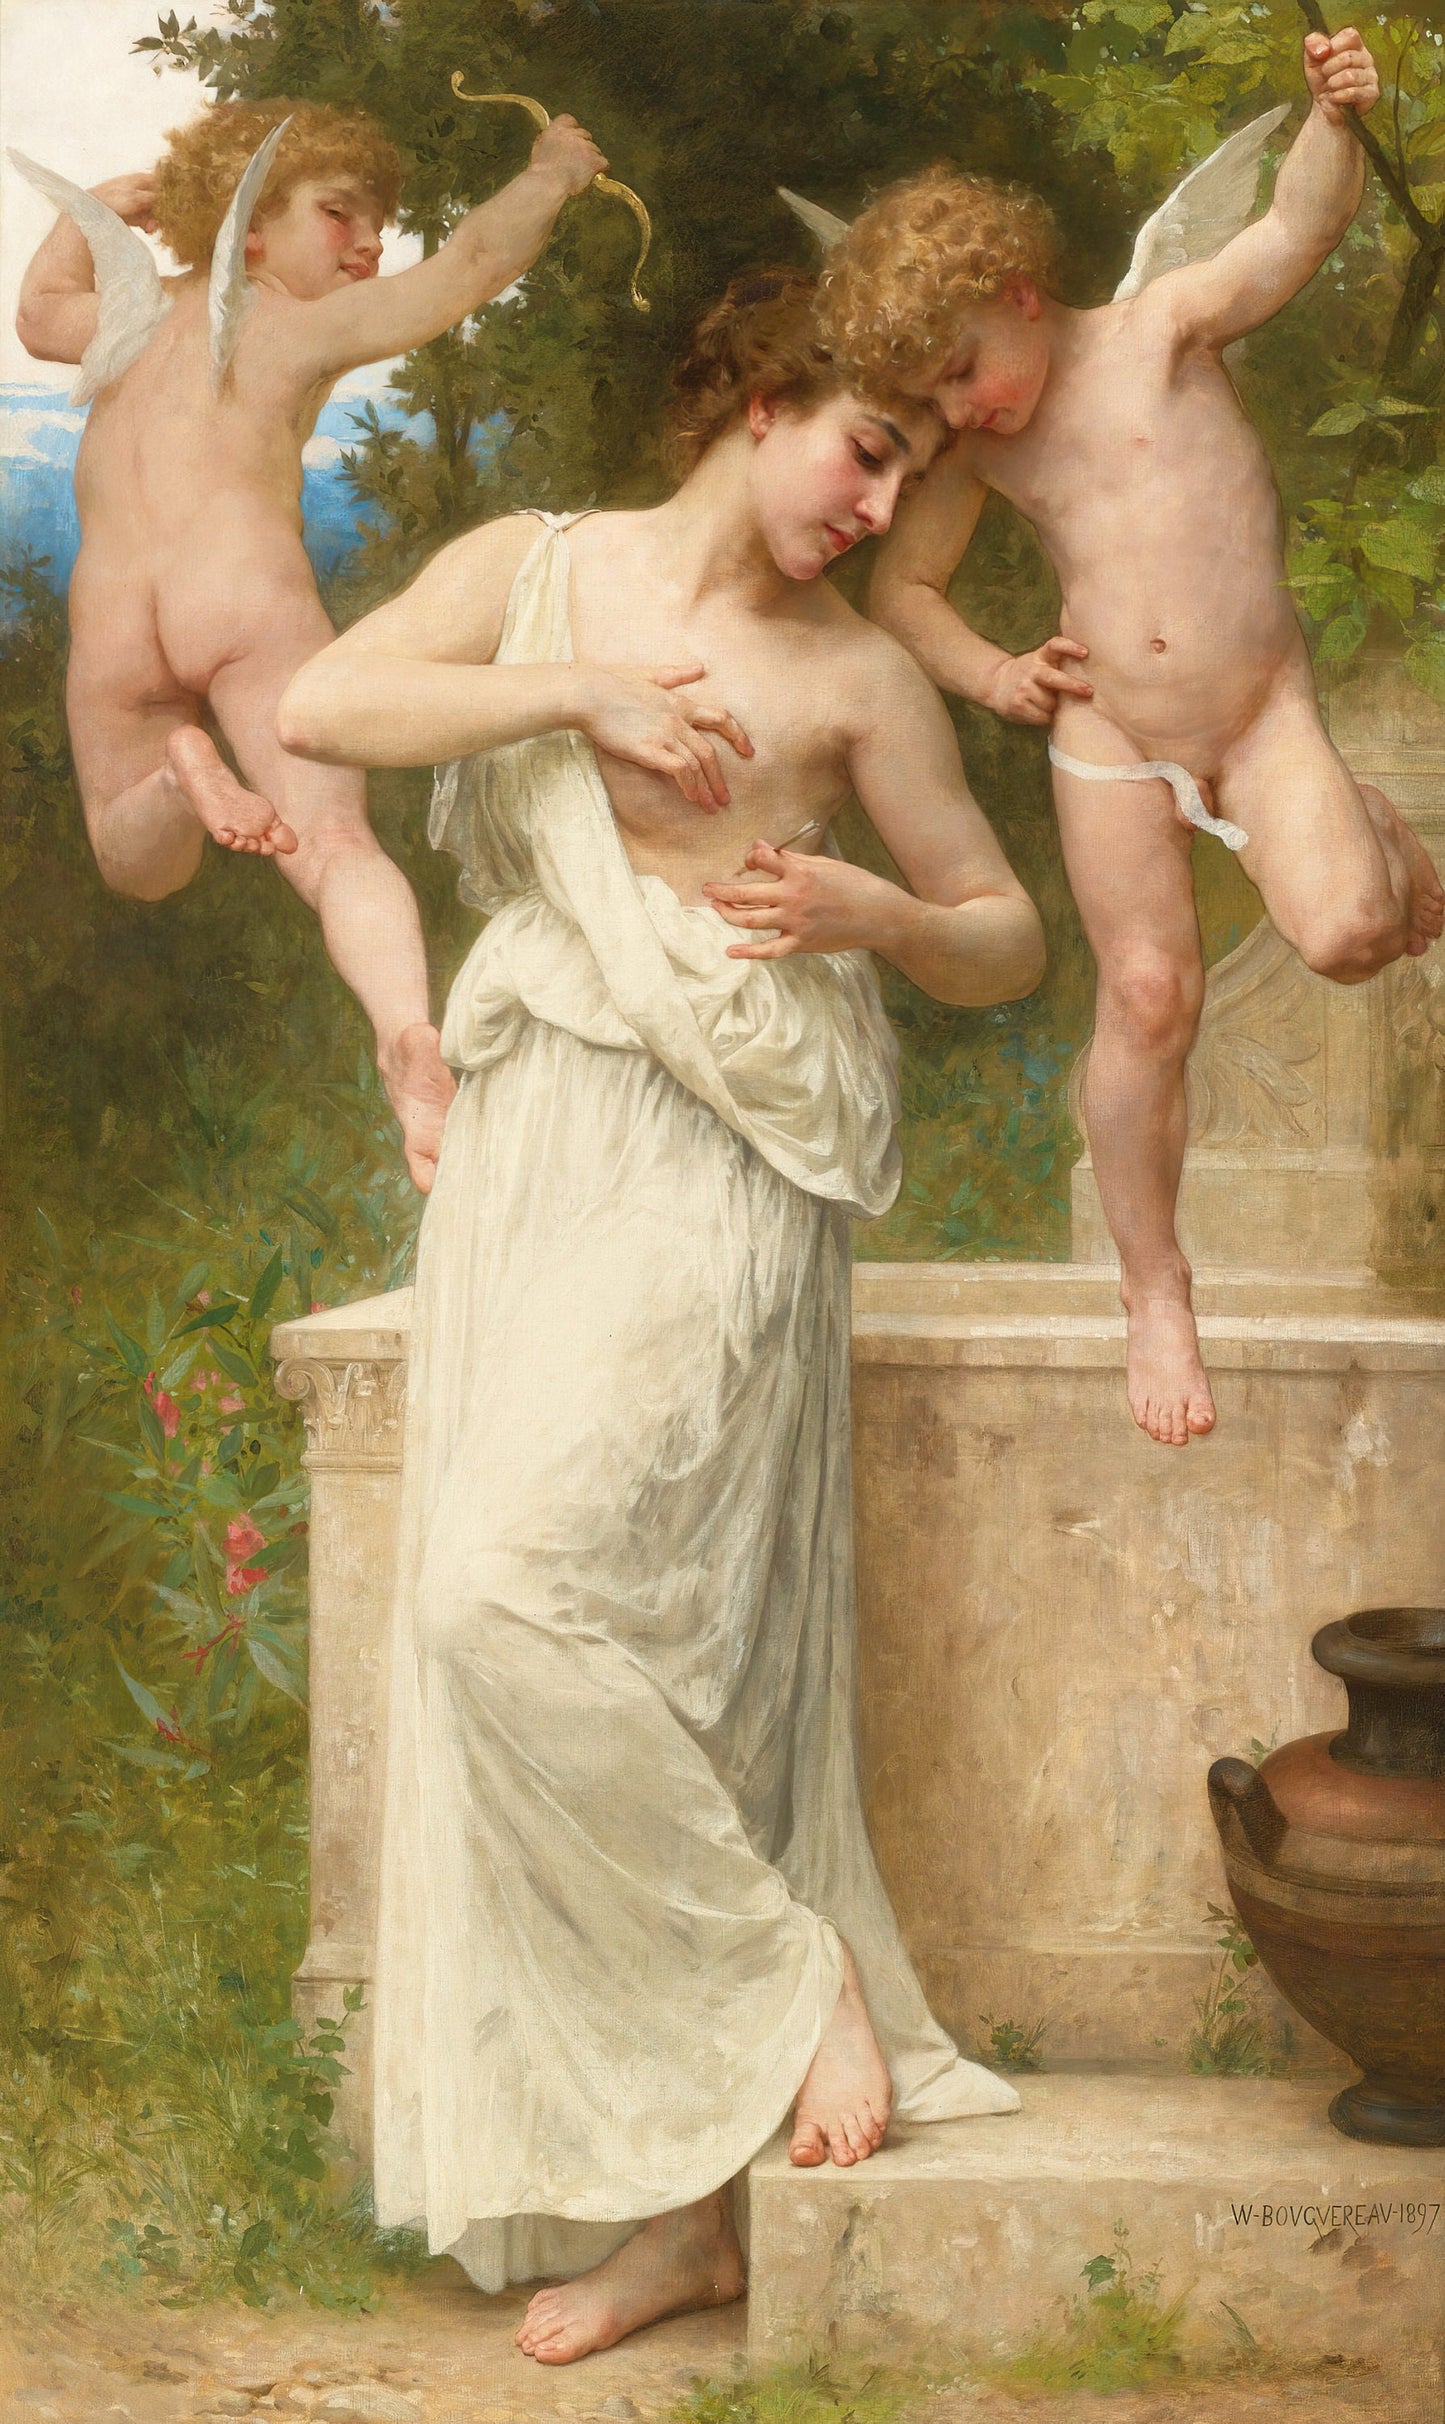 William Bouguereau Neo Classical Paintings Set 2 [50 Images]